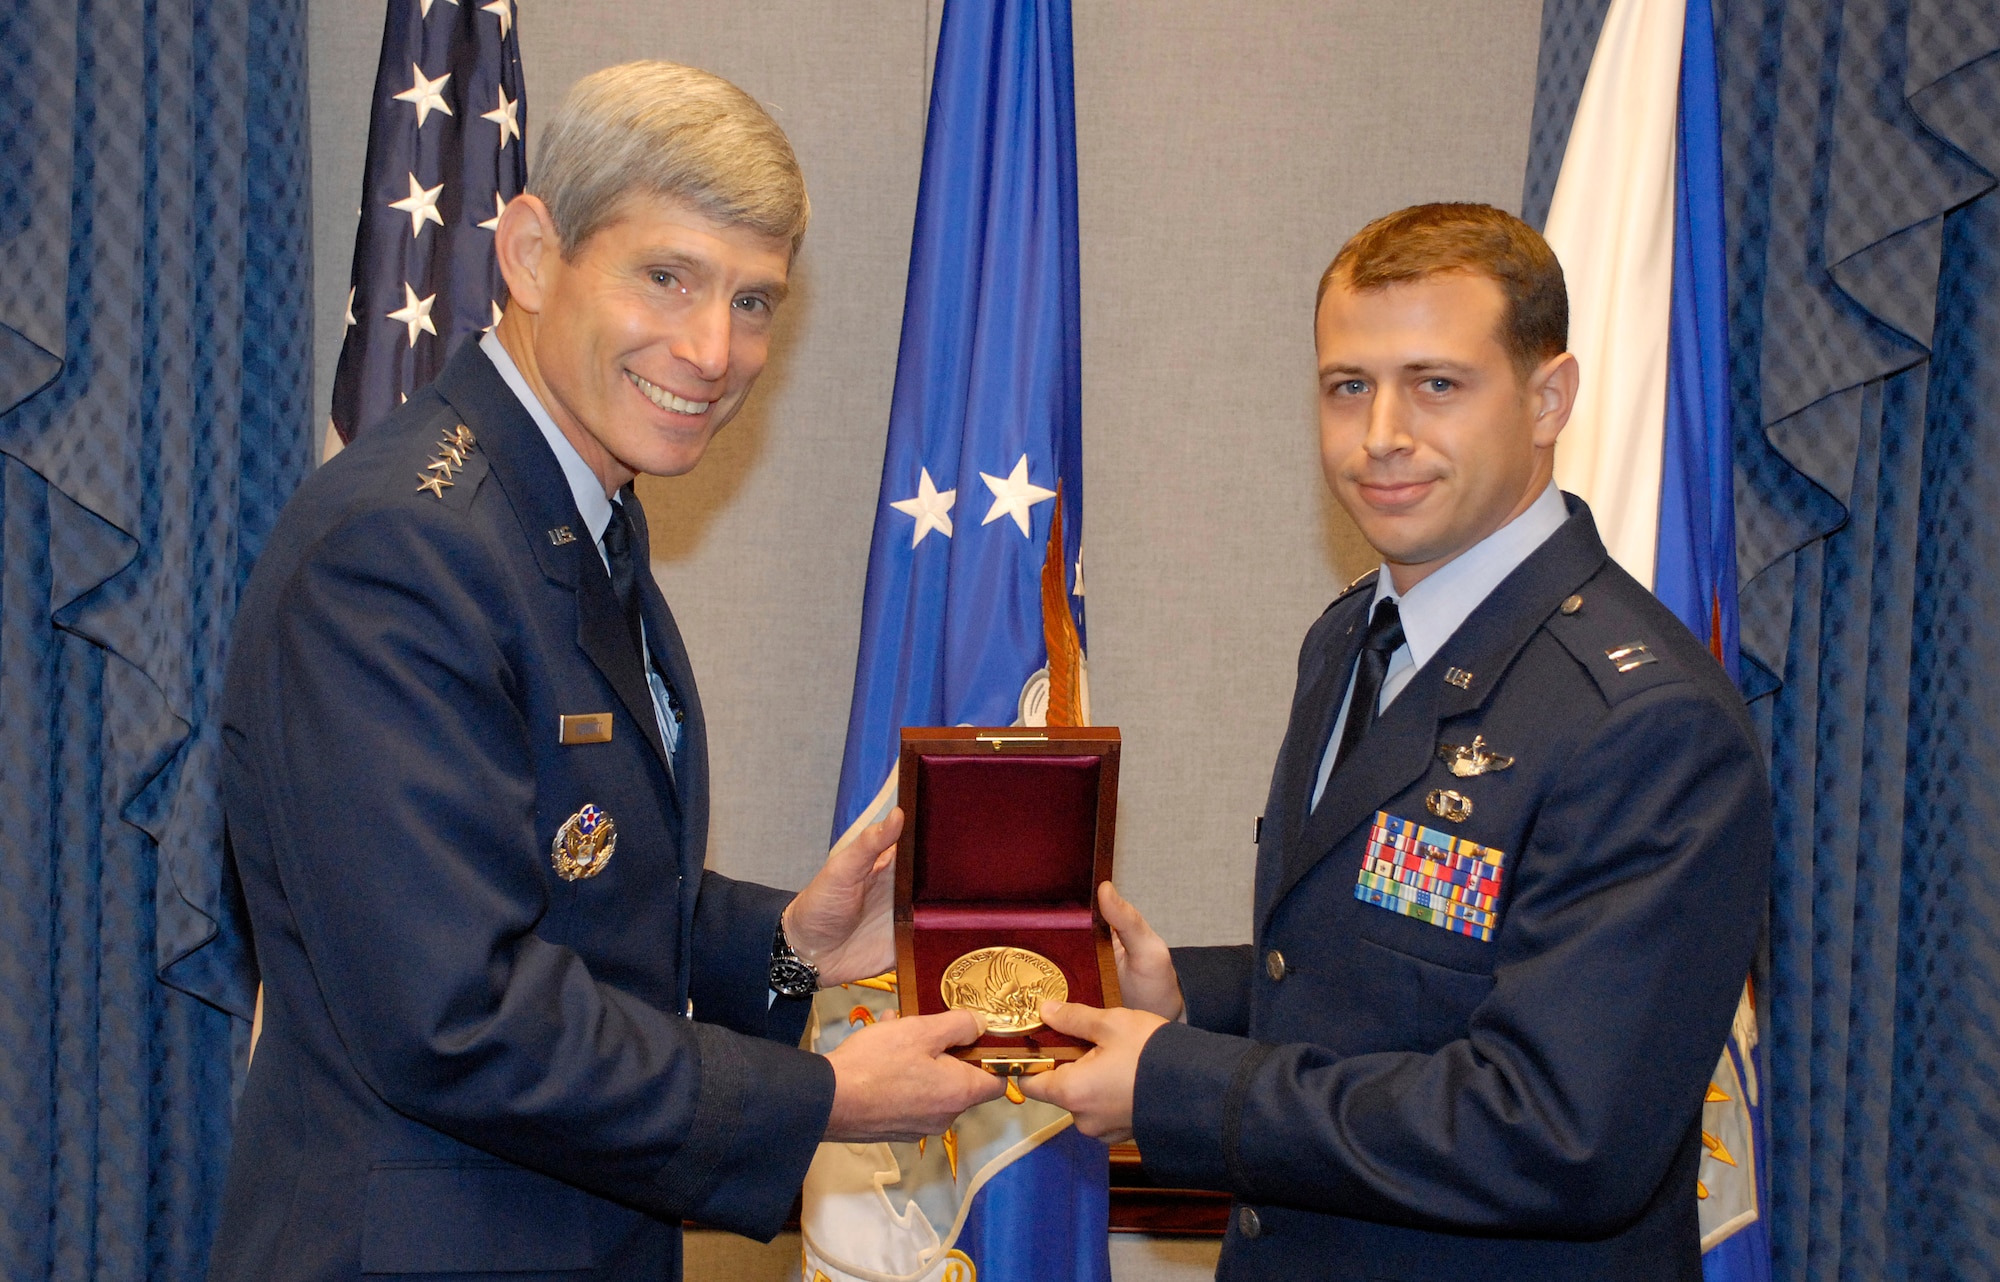 Air Force Chief of Staff Gen. Norton Schwartz presents Capt. Daniel Santoro with the Cheney Award Oct. 8, 2009 at the Pentagon. Captain Santoro's leadership and foresight led his squadron to successfully complete 29 missions, delivering 95 passengers and 211 tons of humanitarian aid to the war-torn country of Georgia, following an August 2008 Russian invasion. Capt. Santoro is a C-130E Hercules instructor pilot and the chief of tactics assigned to the 37th Airlift Squadron at Ramstein Air Base, Germany. (U.S. Air Force photo/Master Sgt. Stan Parker)
